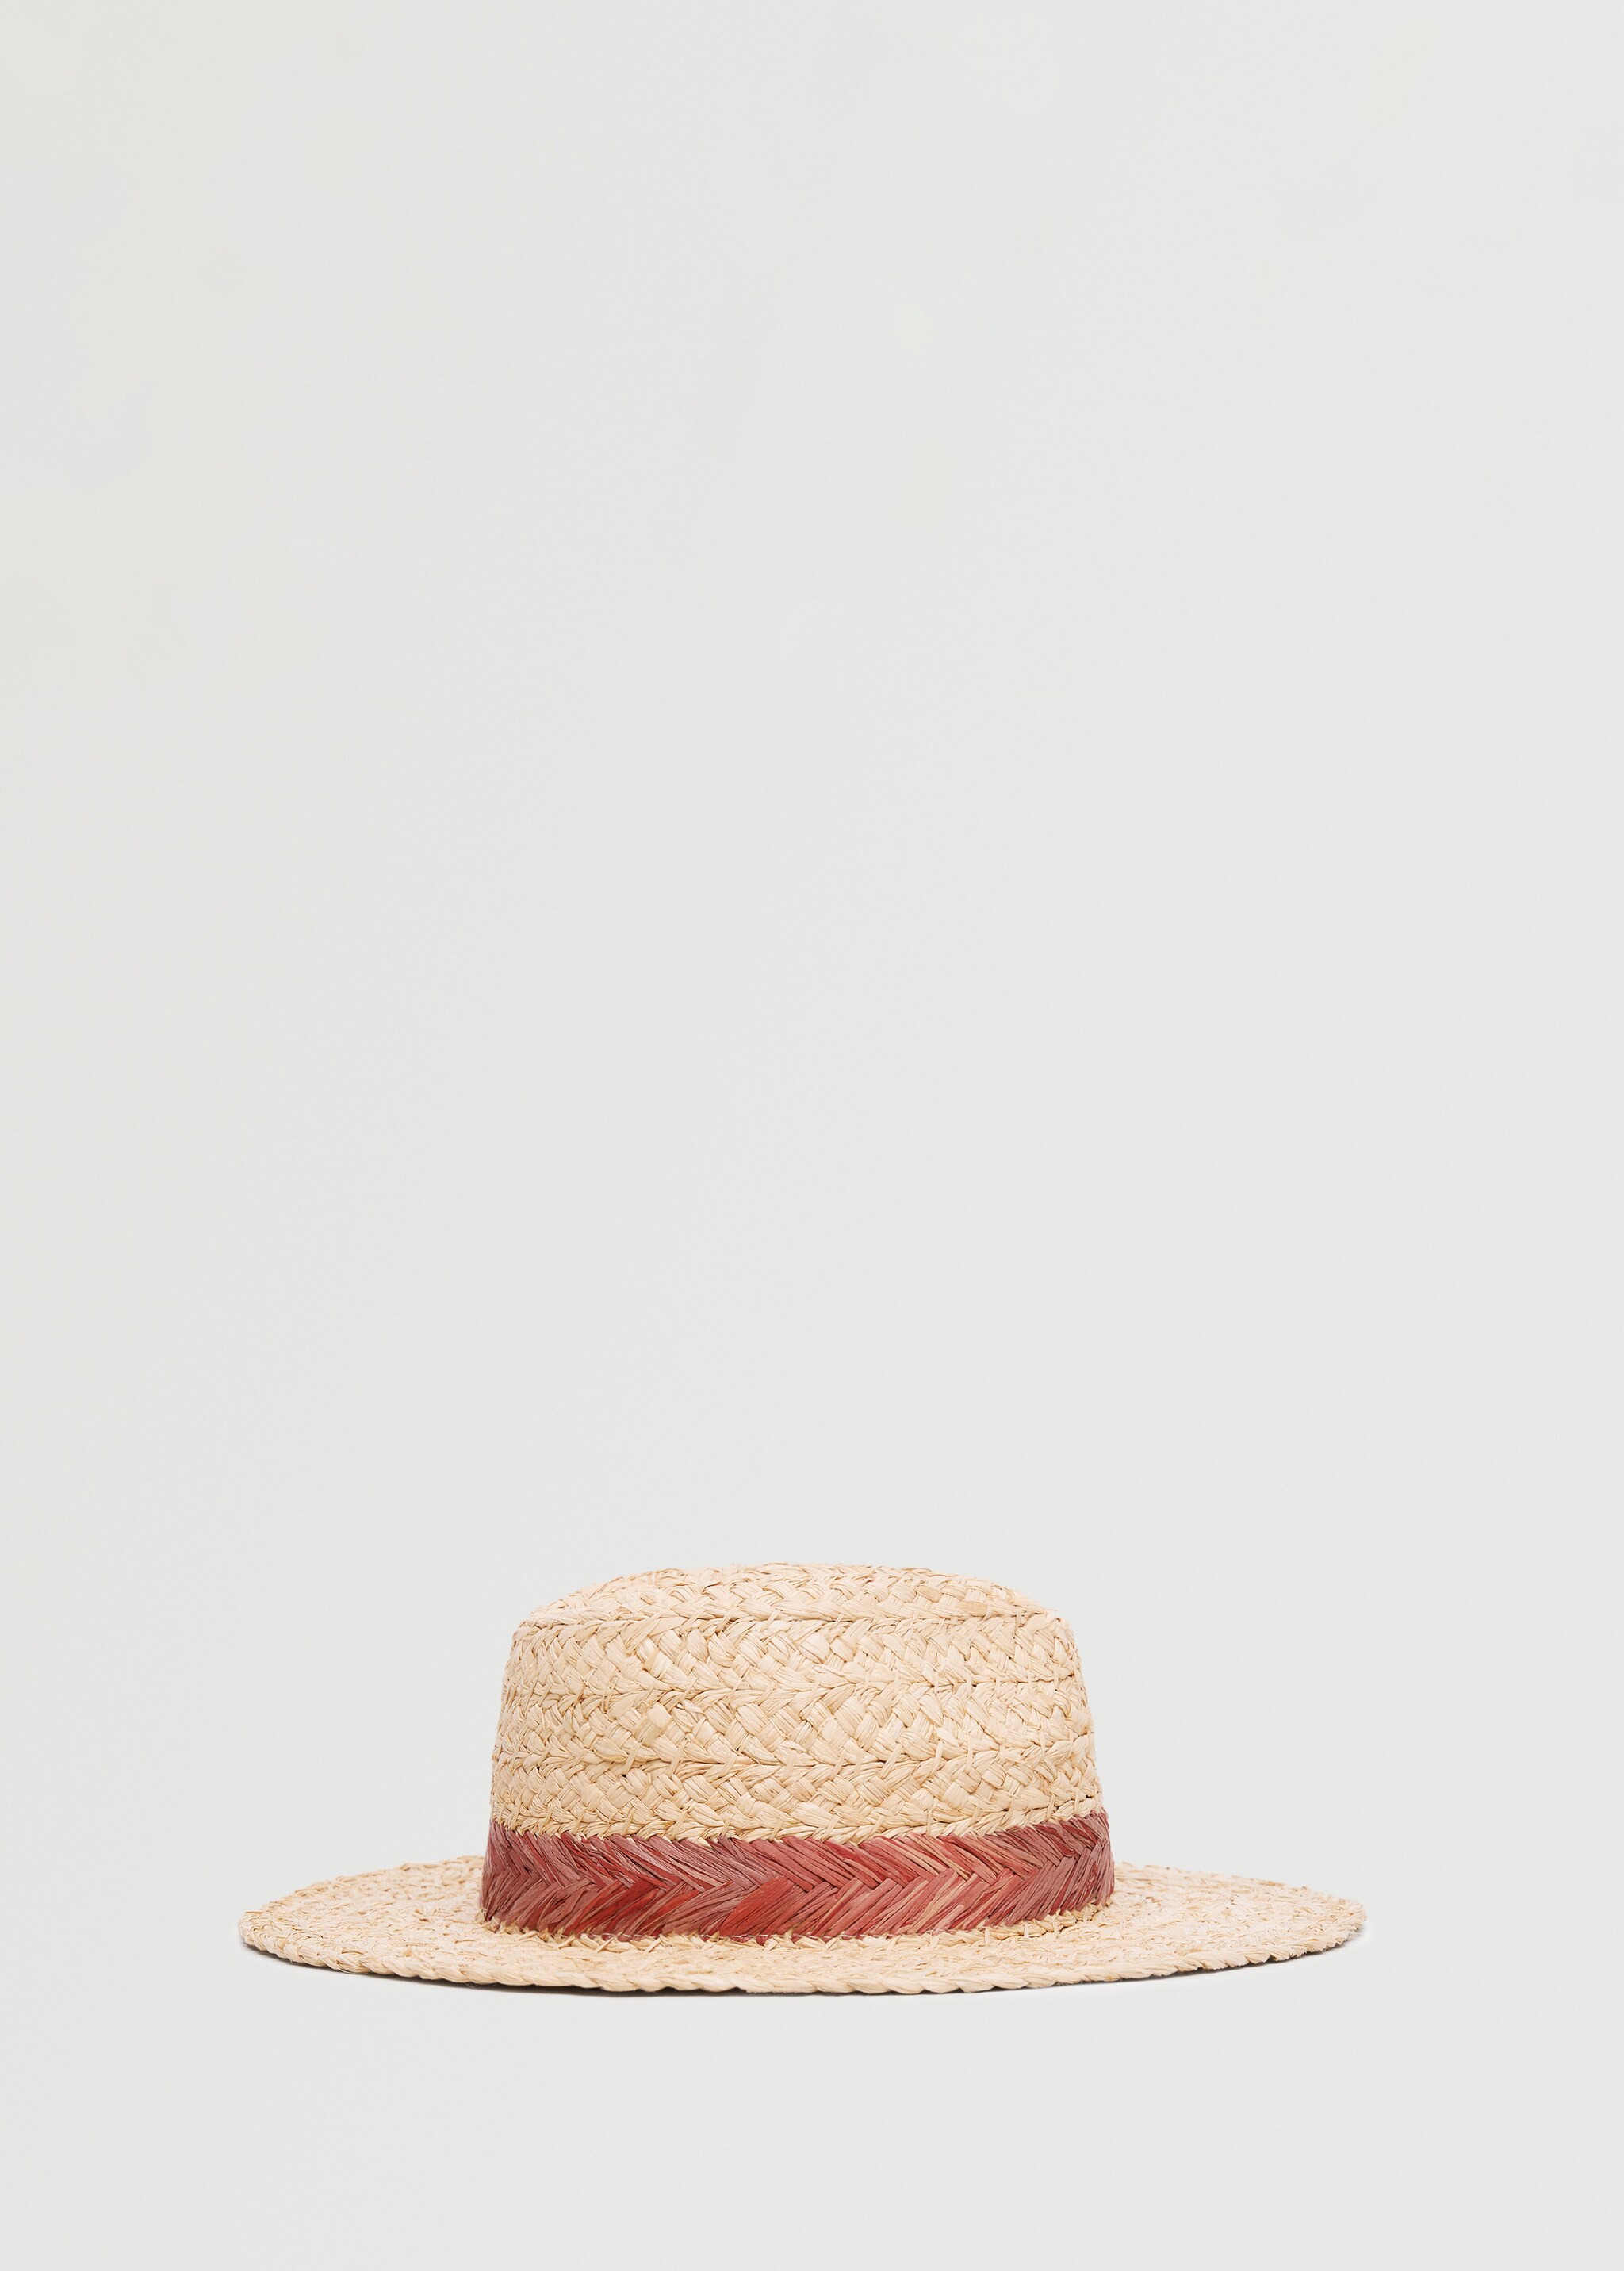 Braided straw hat - Article without model